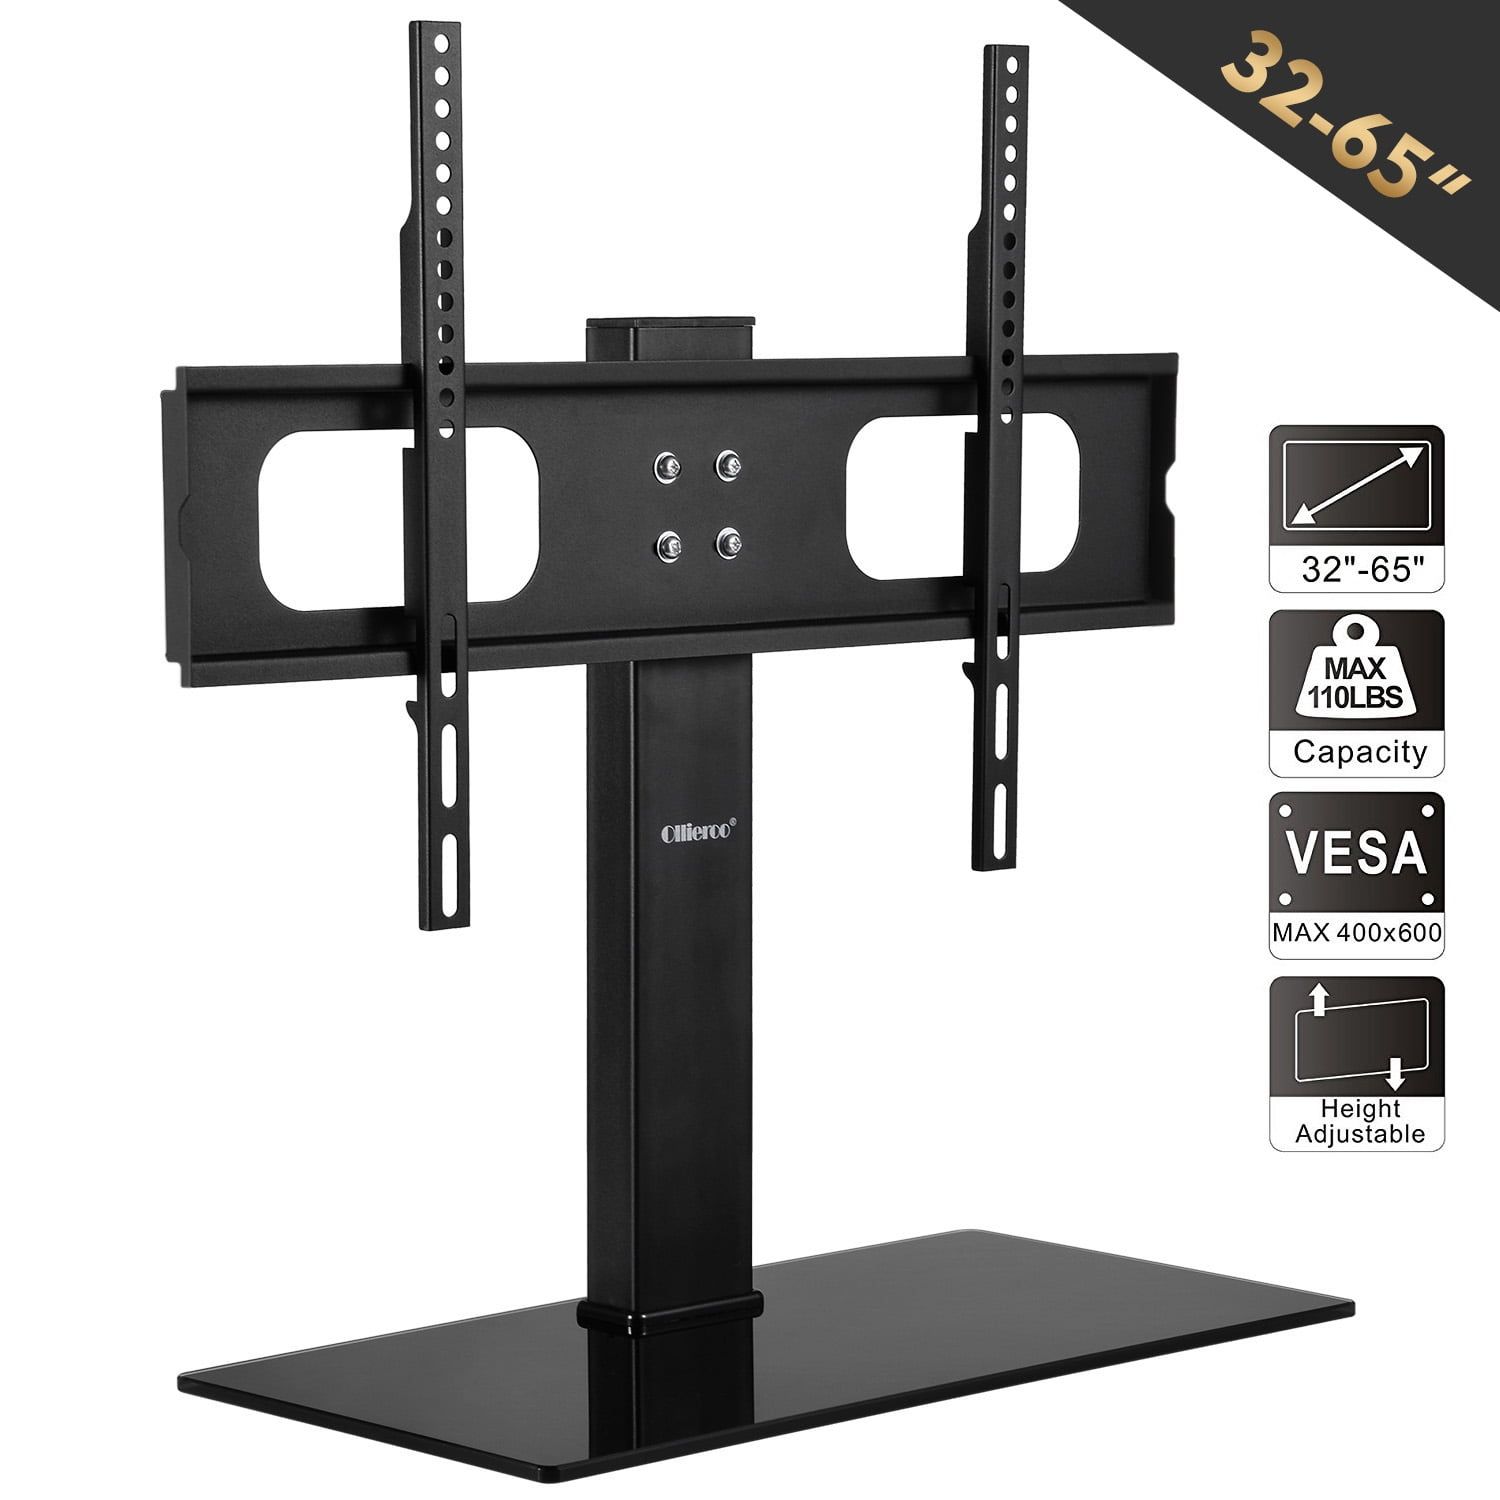 Universal Tabletop Tv Stand Base For 32 – 65 Inch Lcd Led Tvs Folding Tv  Stand Pedestal Wall Display Base With Mount – Walmart With Regard To Universal Tabletop Tv Stands (View 3 of 15)